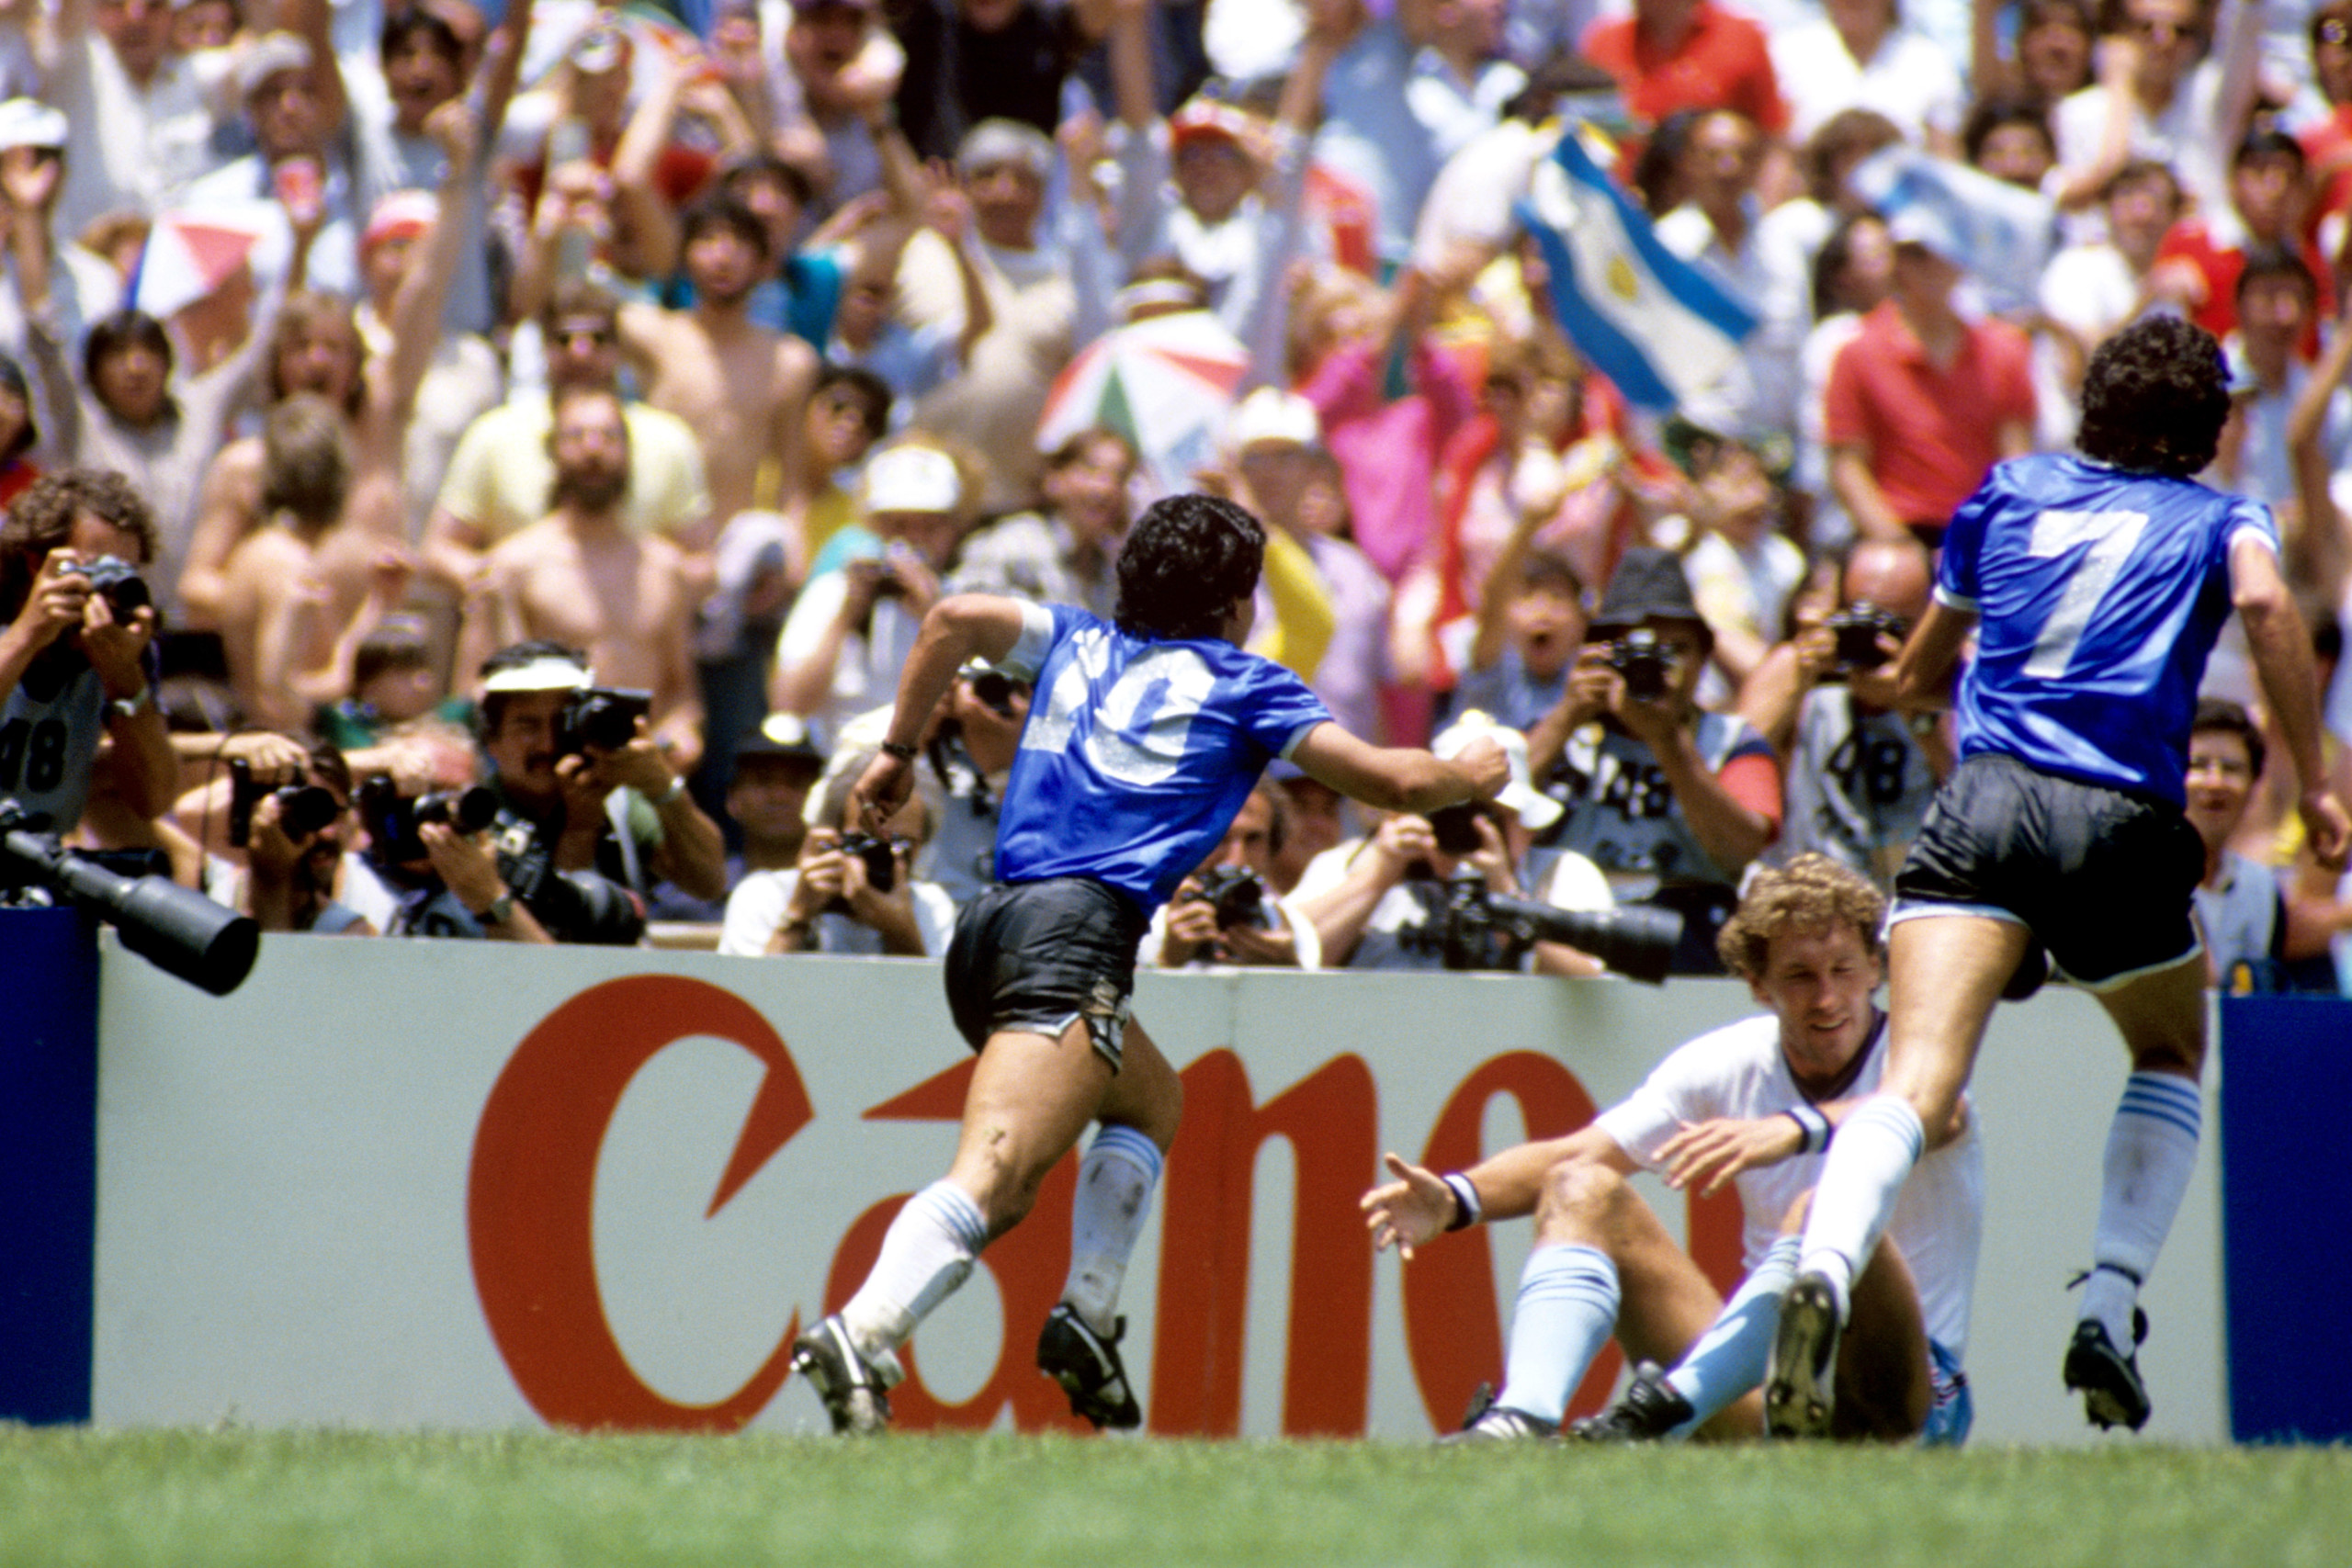 Decoding Diego: Maradona by the Numbers